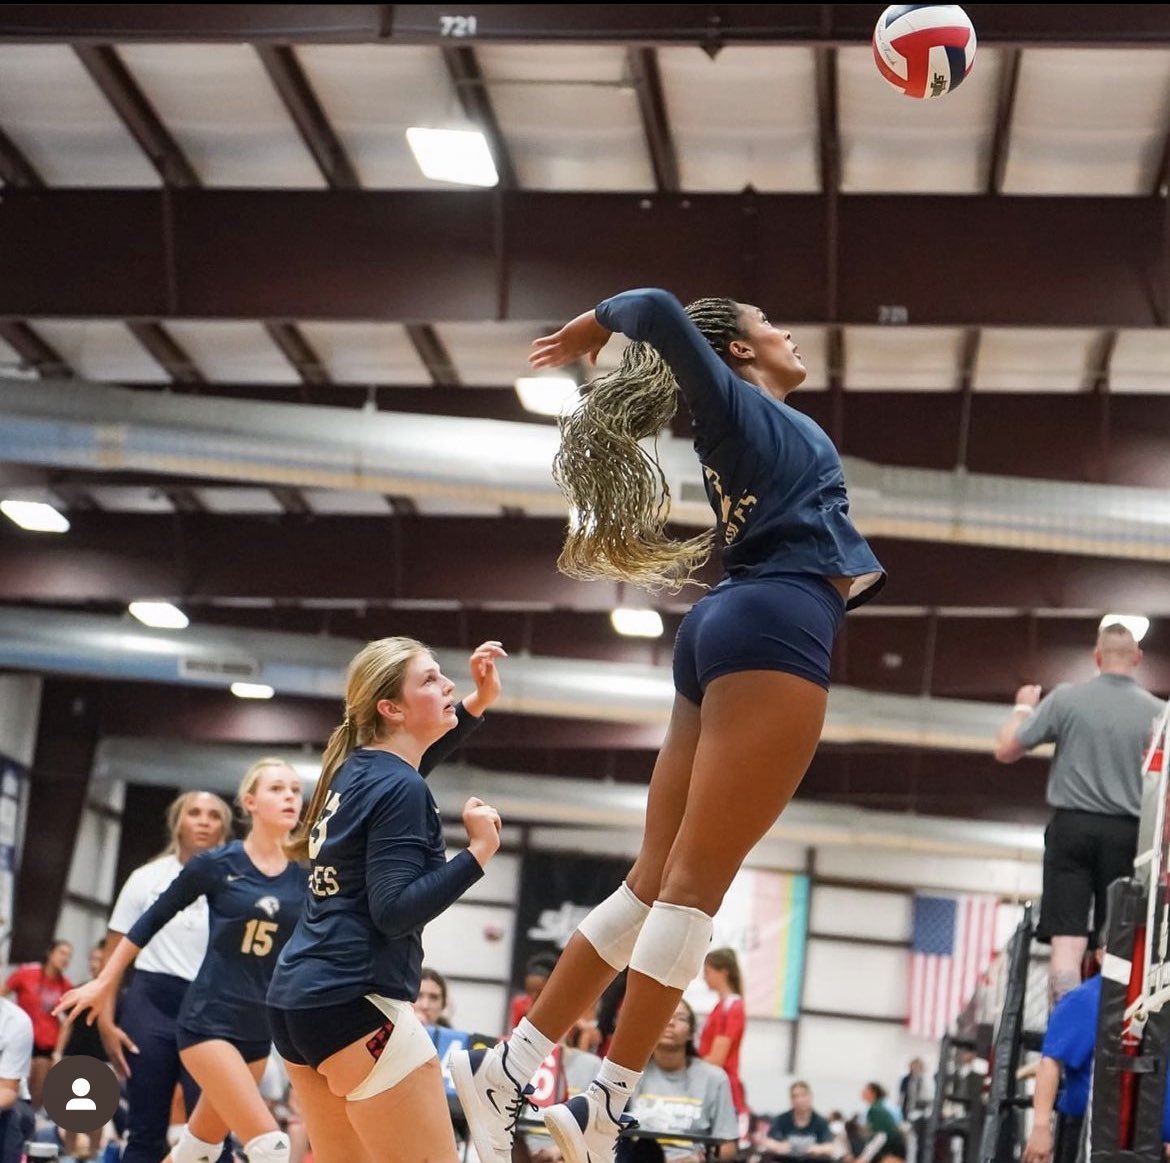 Varsity Volleyball: FINAL #SBSeagles with a strong showing at Houston Open 4-2 on the weekend with wins over @cougarfanatics @OakOwlsSports @JCS_Athletics @BacsAthletics